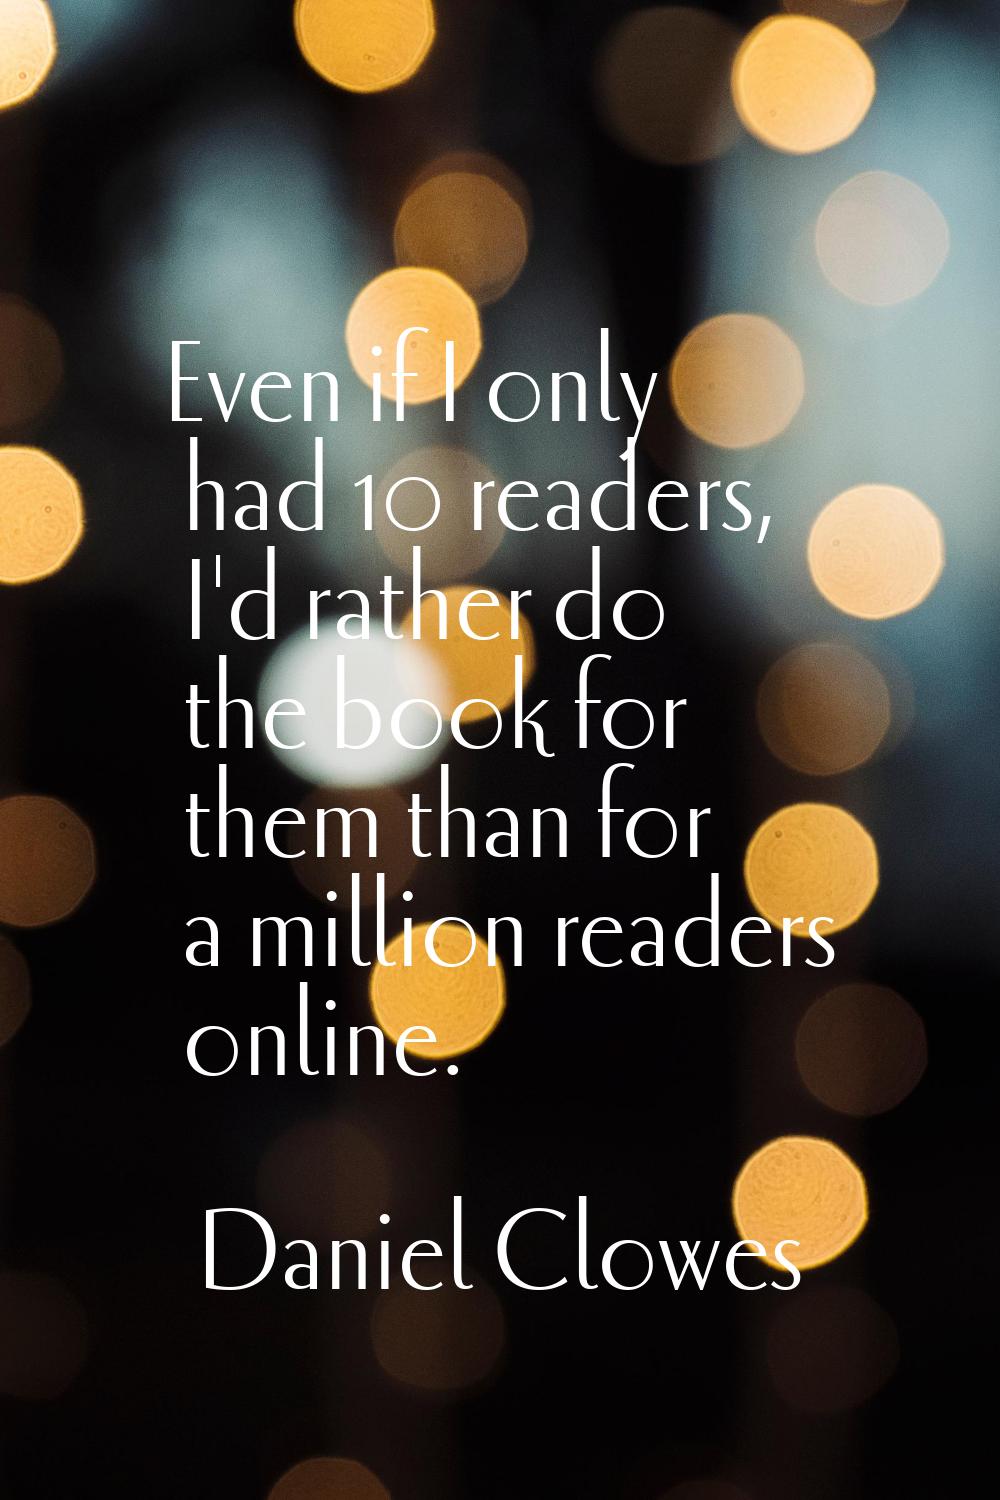 Even if I only had 10 readers, I'd rather do the book for them than for a million readers online.